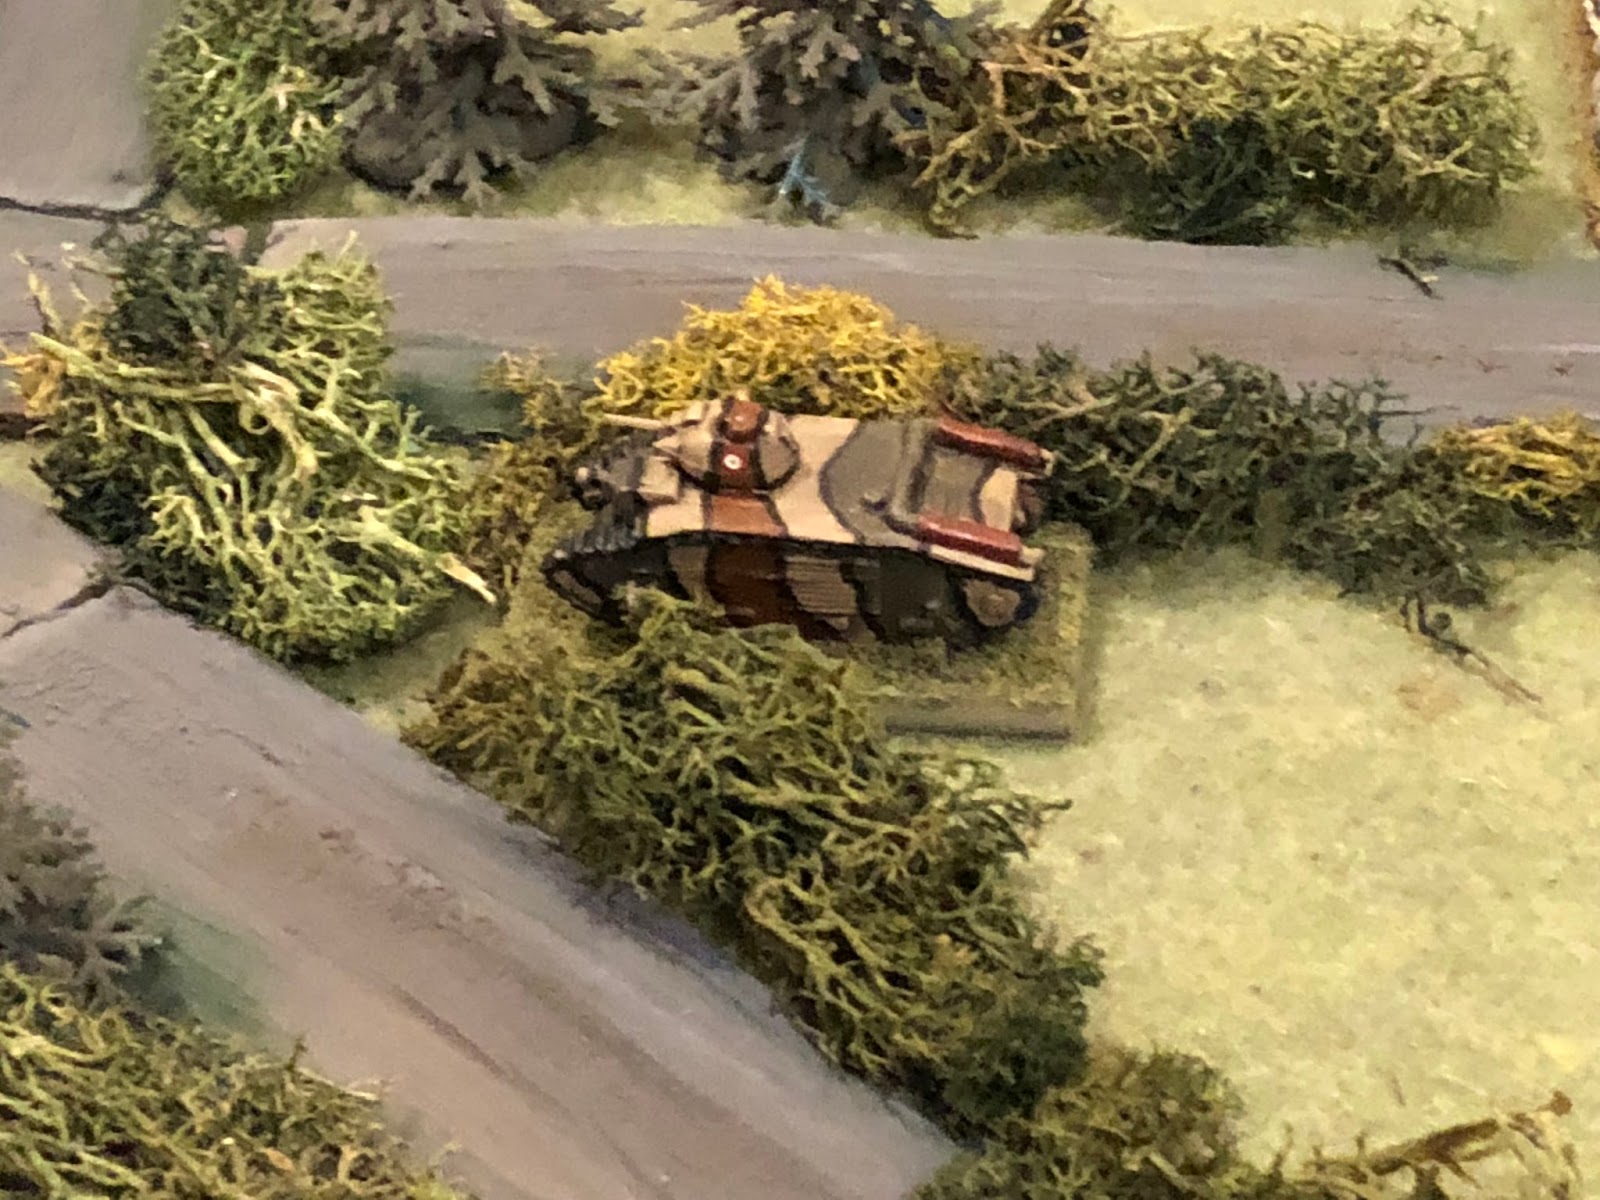  "Contact, enemy tank at the crossroads!!!"  Just so we're all on the same page, I told my boy he's only got one tank, but the Germans can't harm it from the front, that he needed to protect it's flanks and rear, though the Germans could pin/suppress